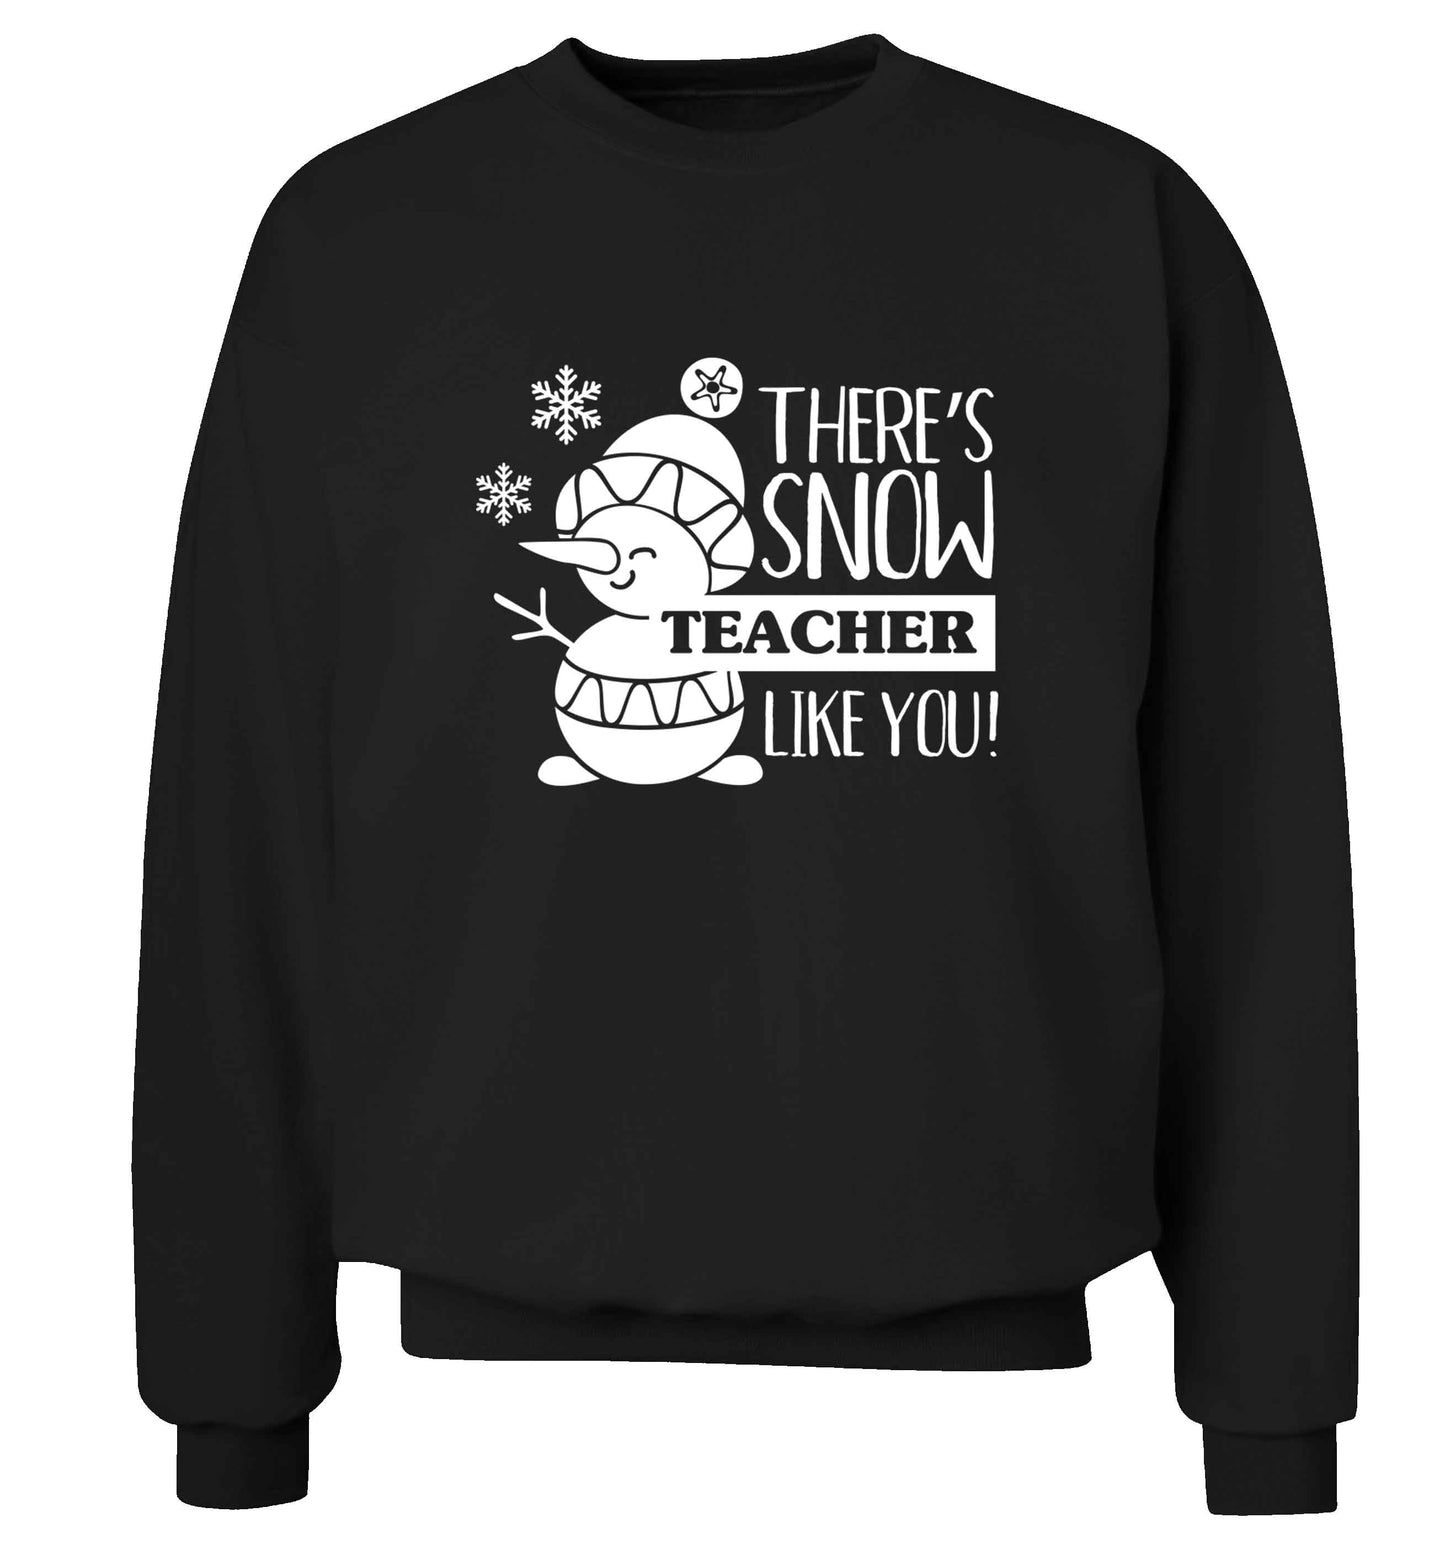 There's snow teacher like you adult's unisex black sweater 2XL